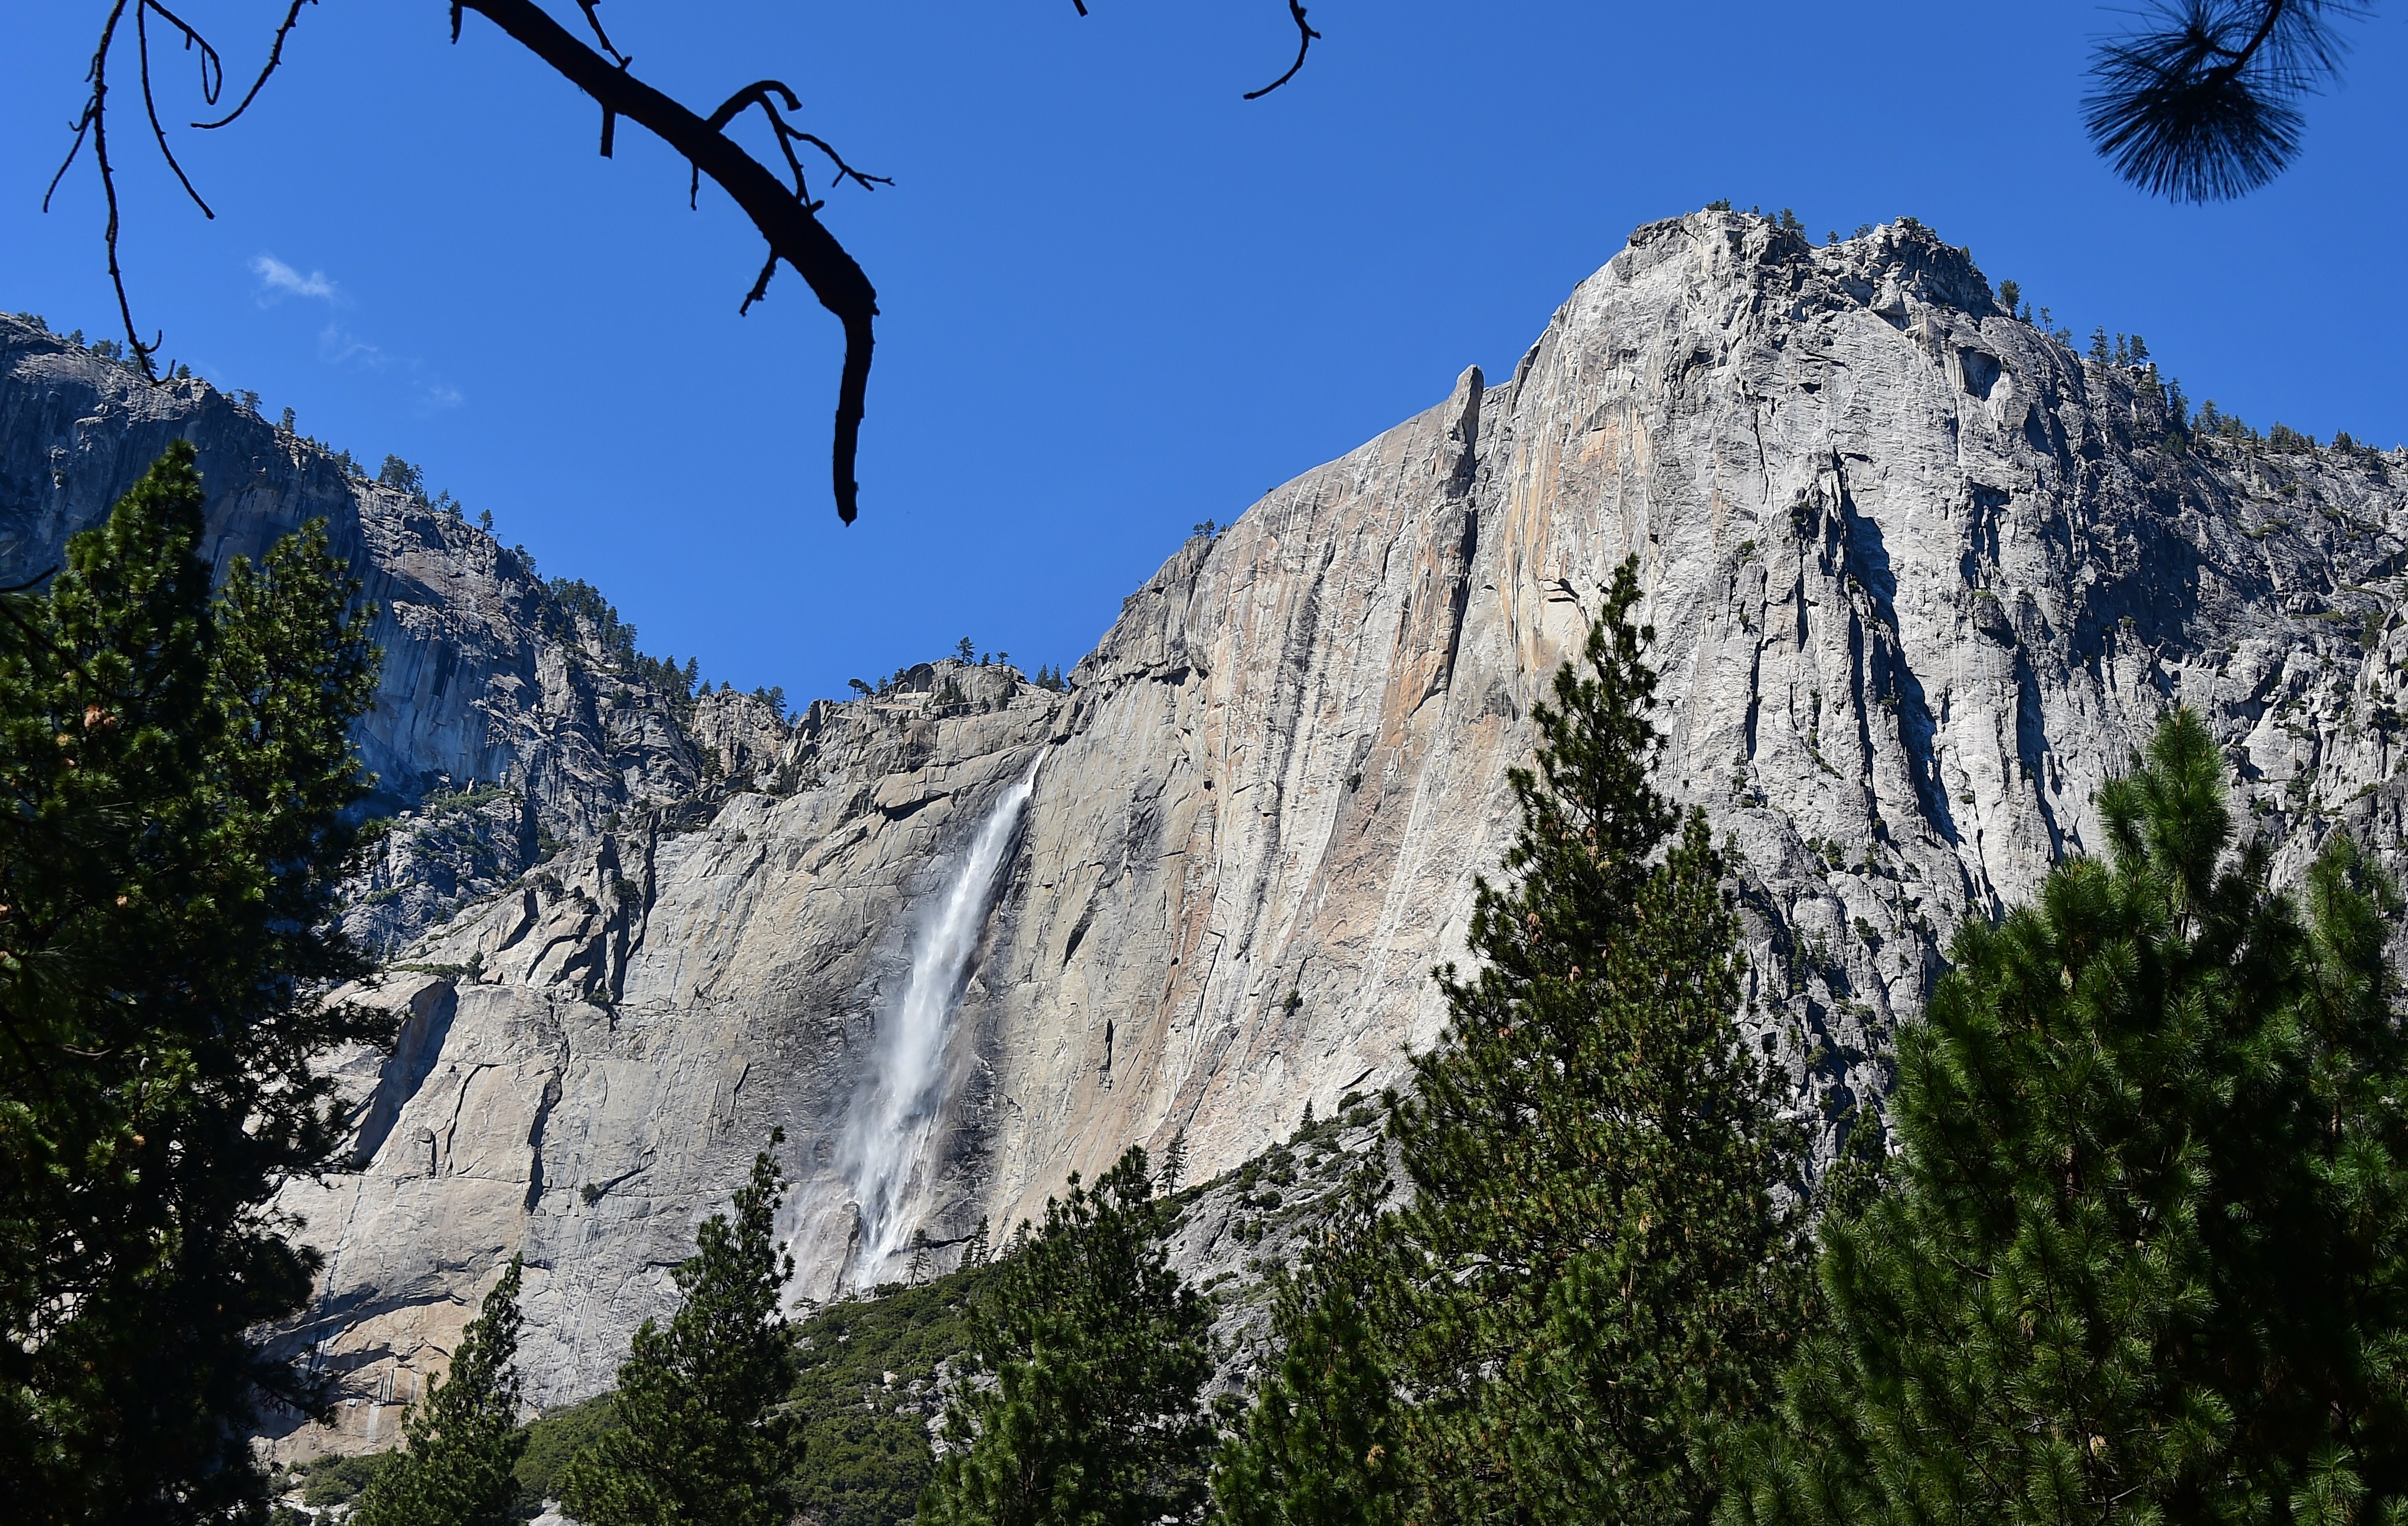 Yosemite National Park could close due to flooding